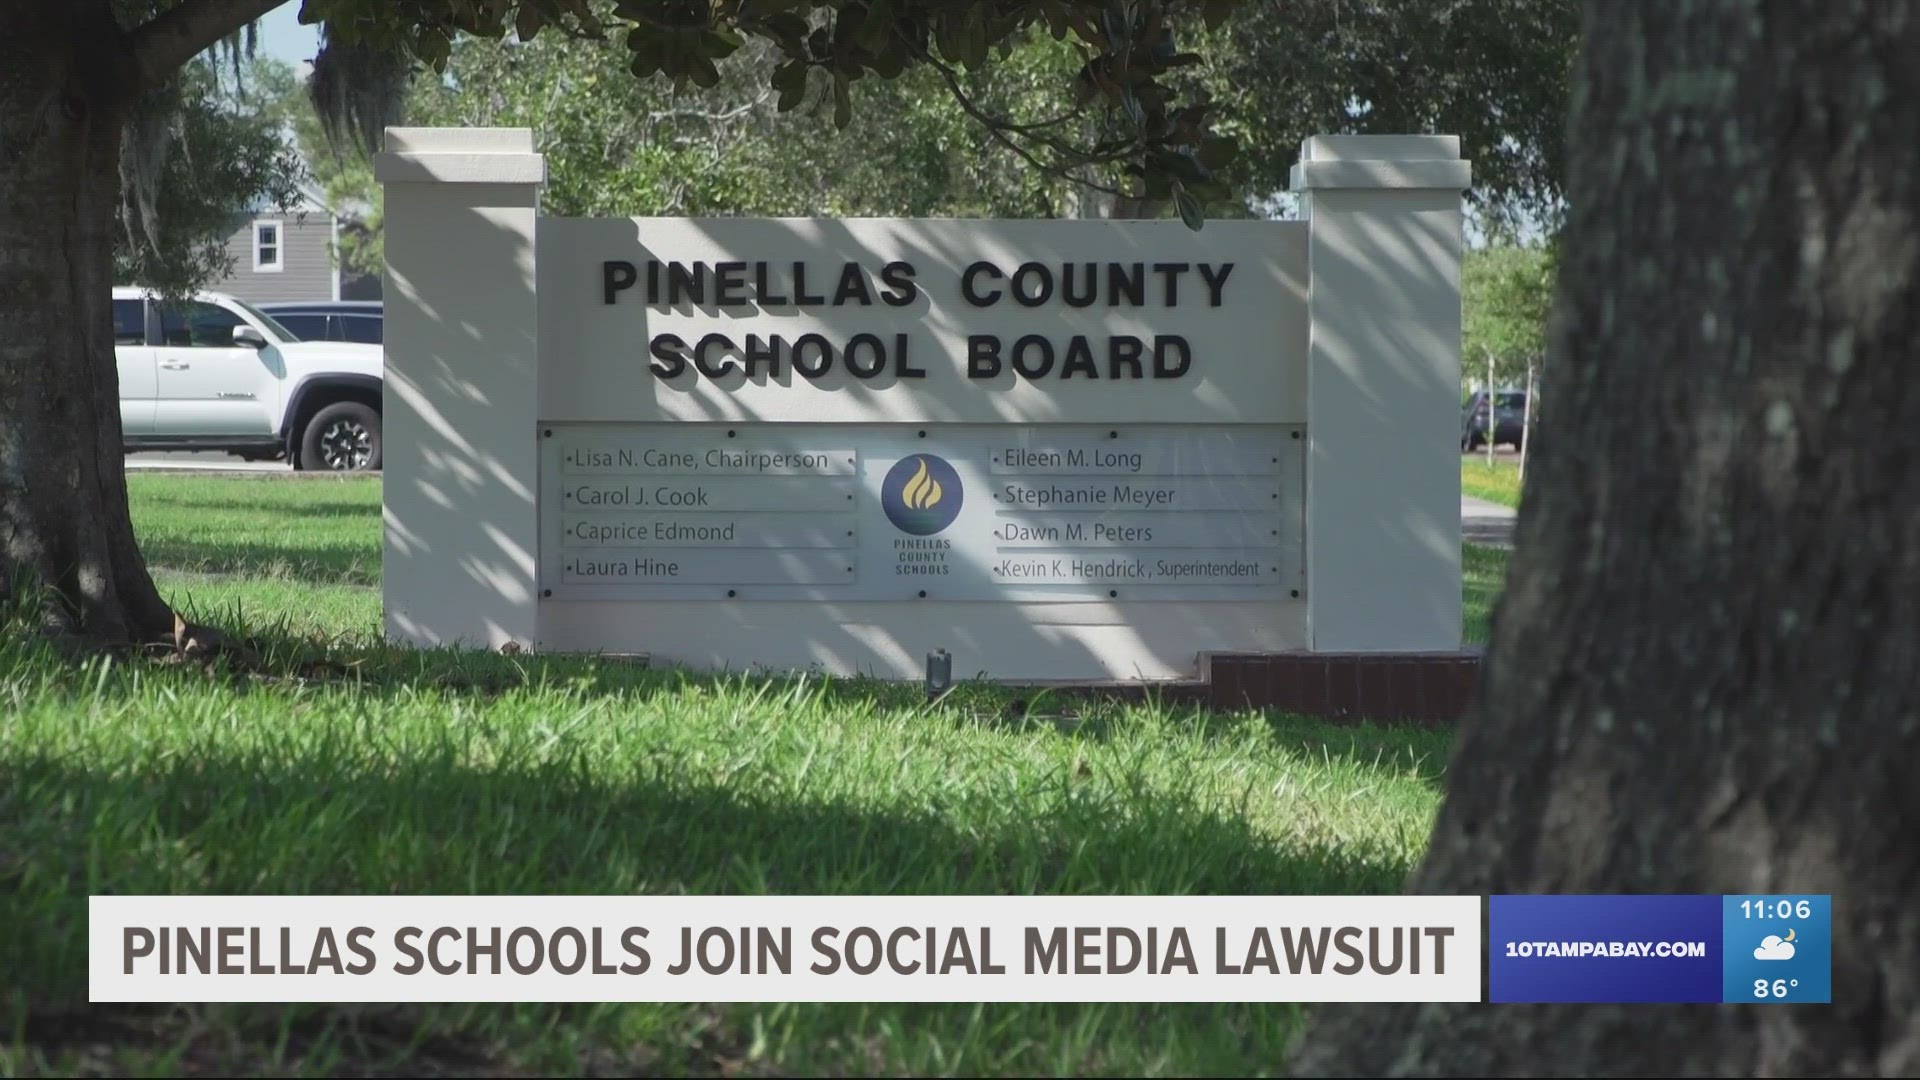 Members with the Pinellas County school board voted in favor of joining a multi-district lawsuit to sue companies like Meta, TikTok, Snapchat and YouTube.